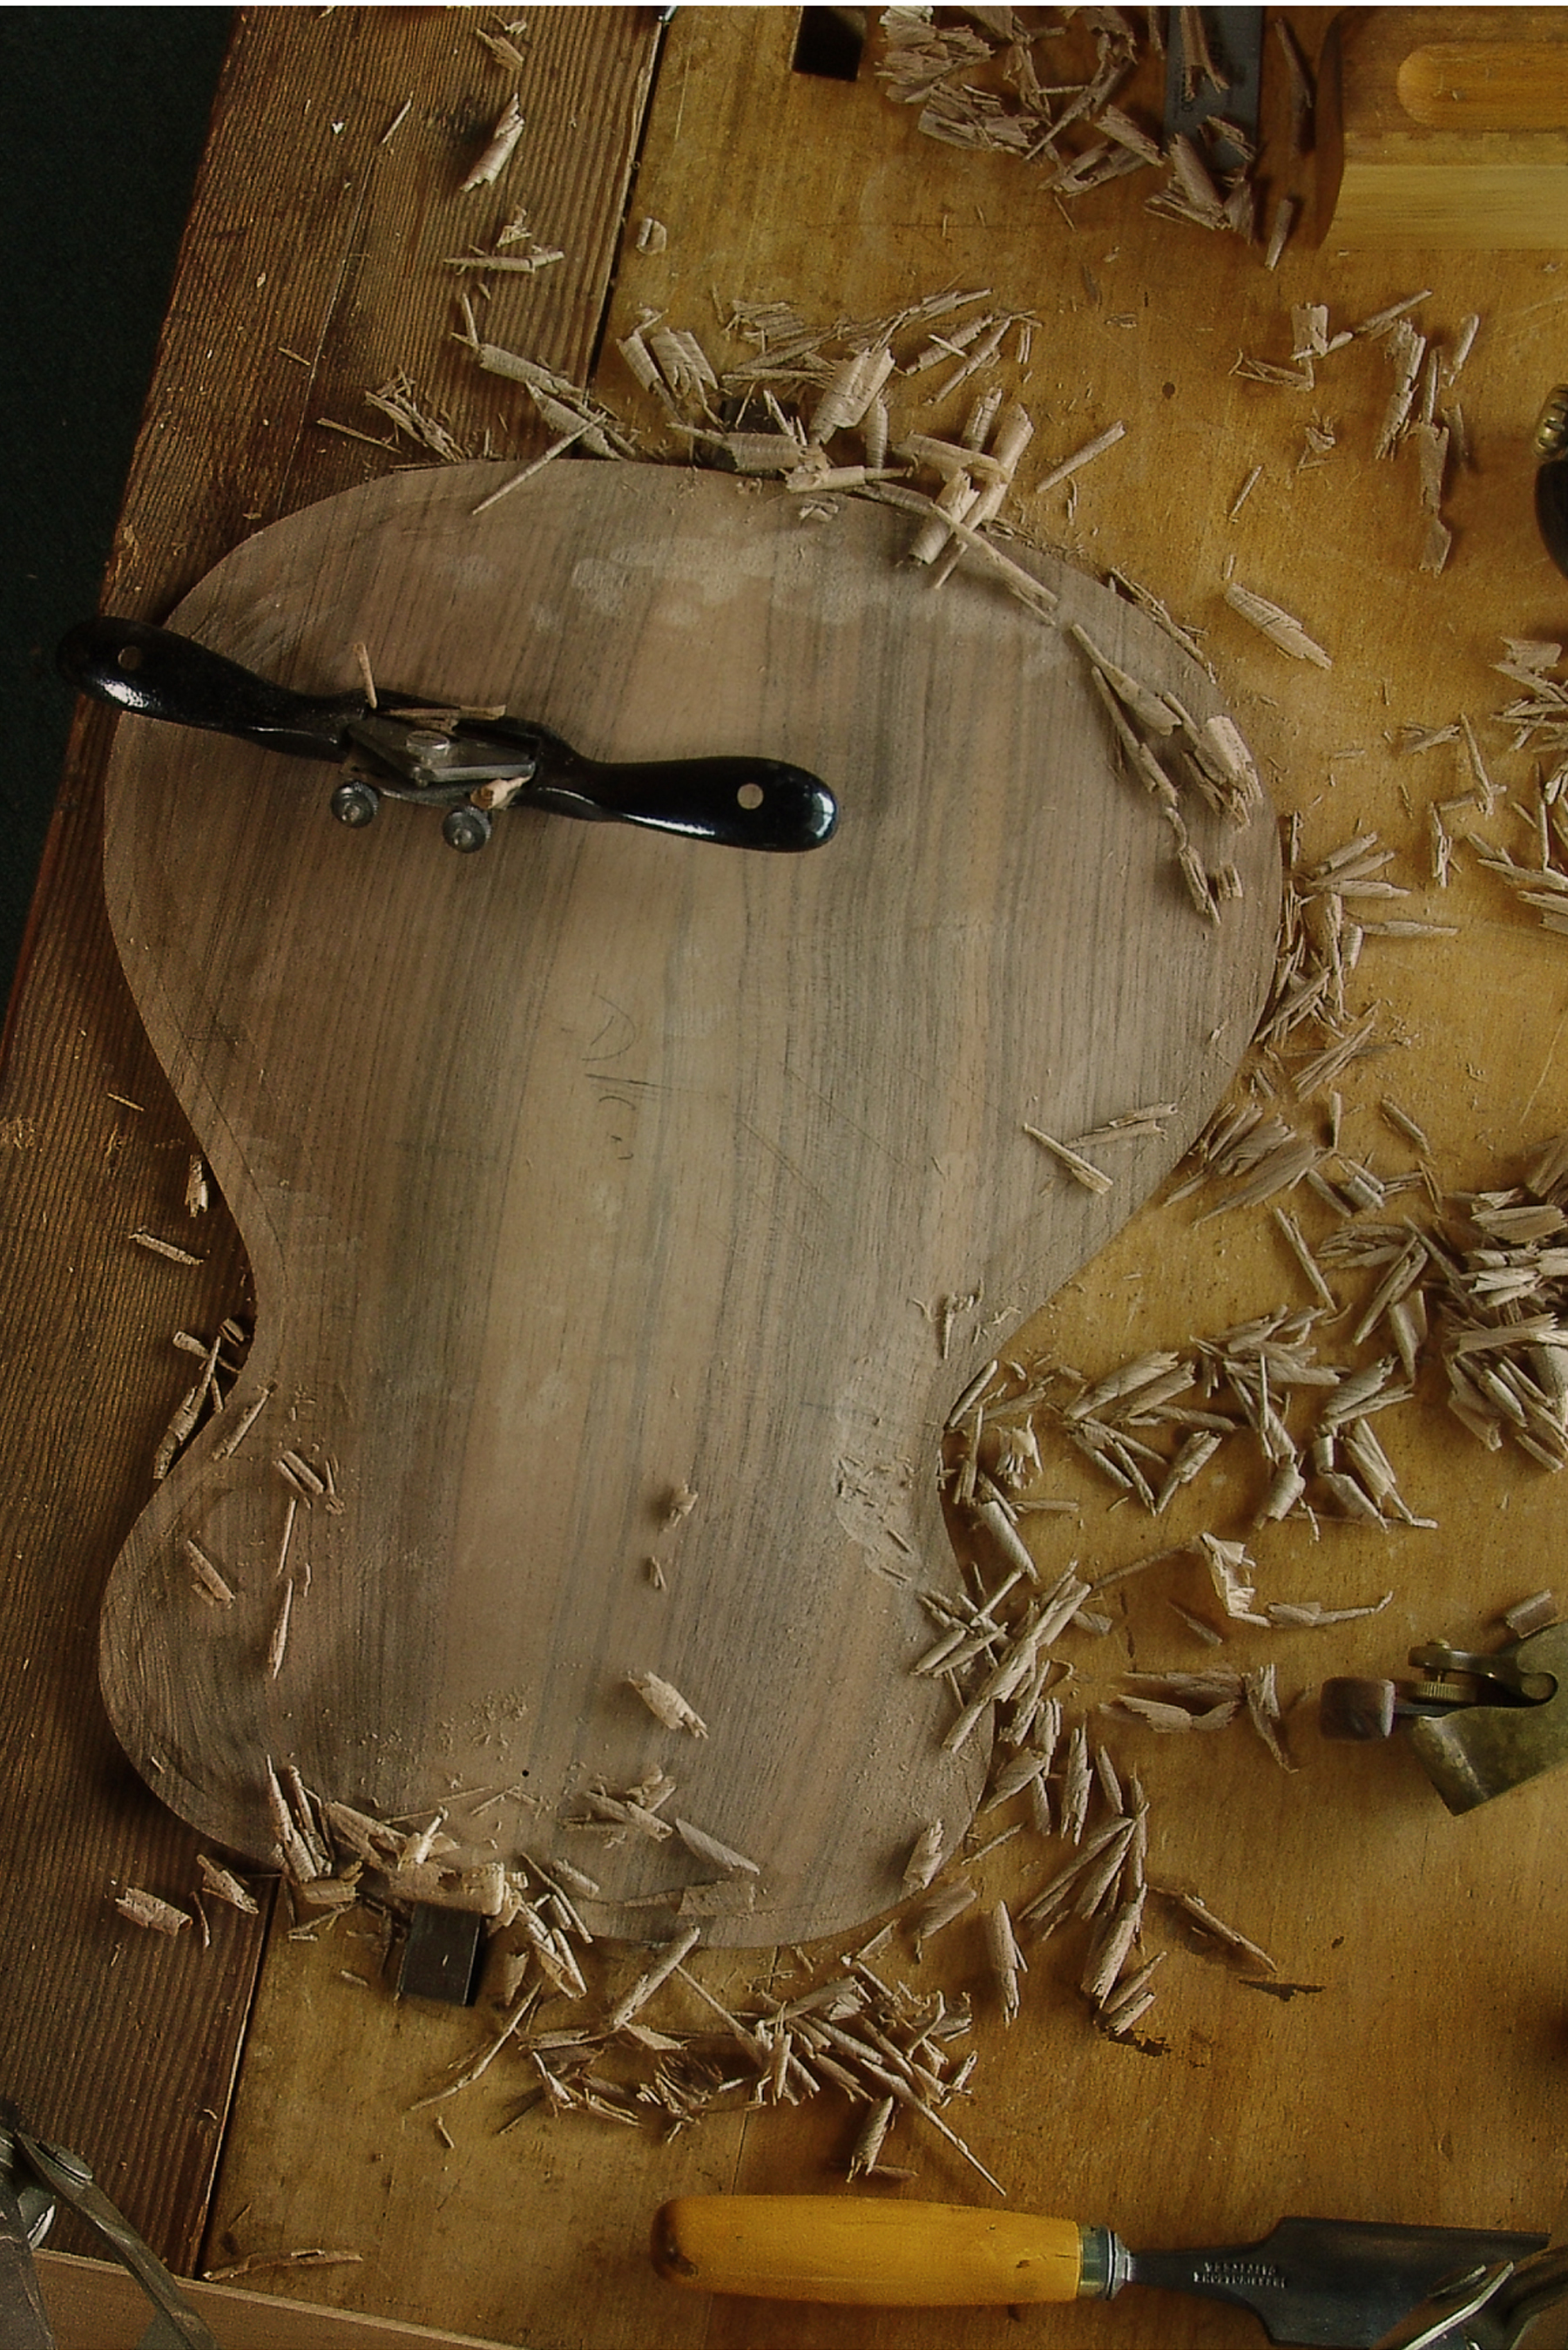 Luthier Peter Stephen, shaping the archtop soundboard for a semi acoustic guitar